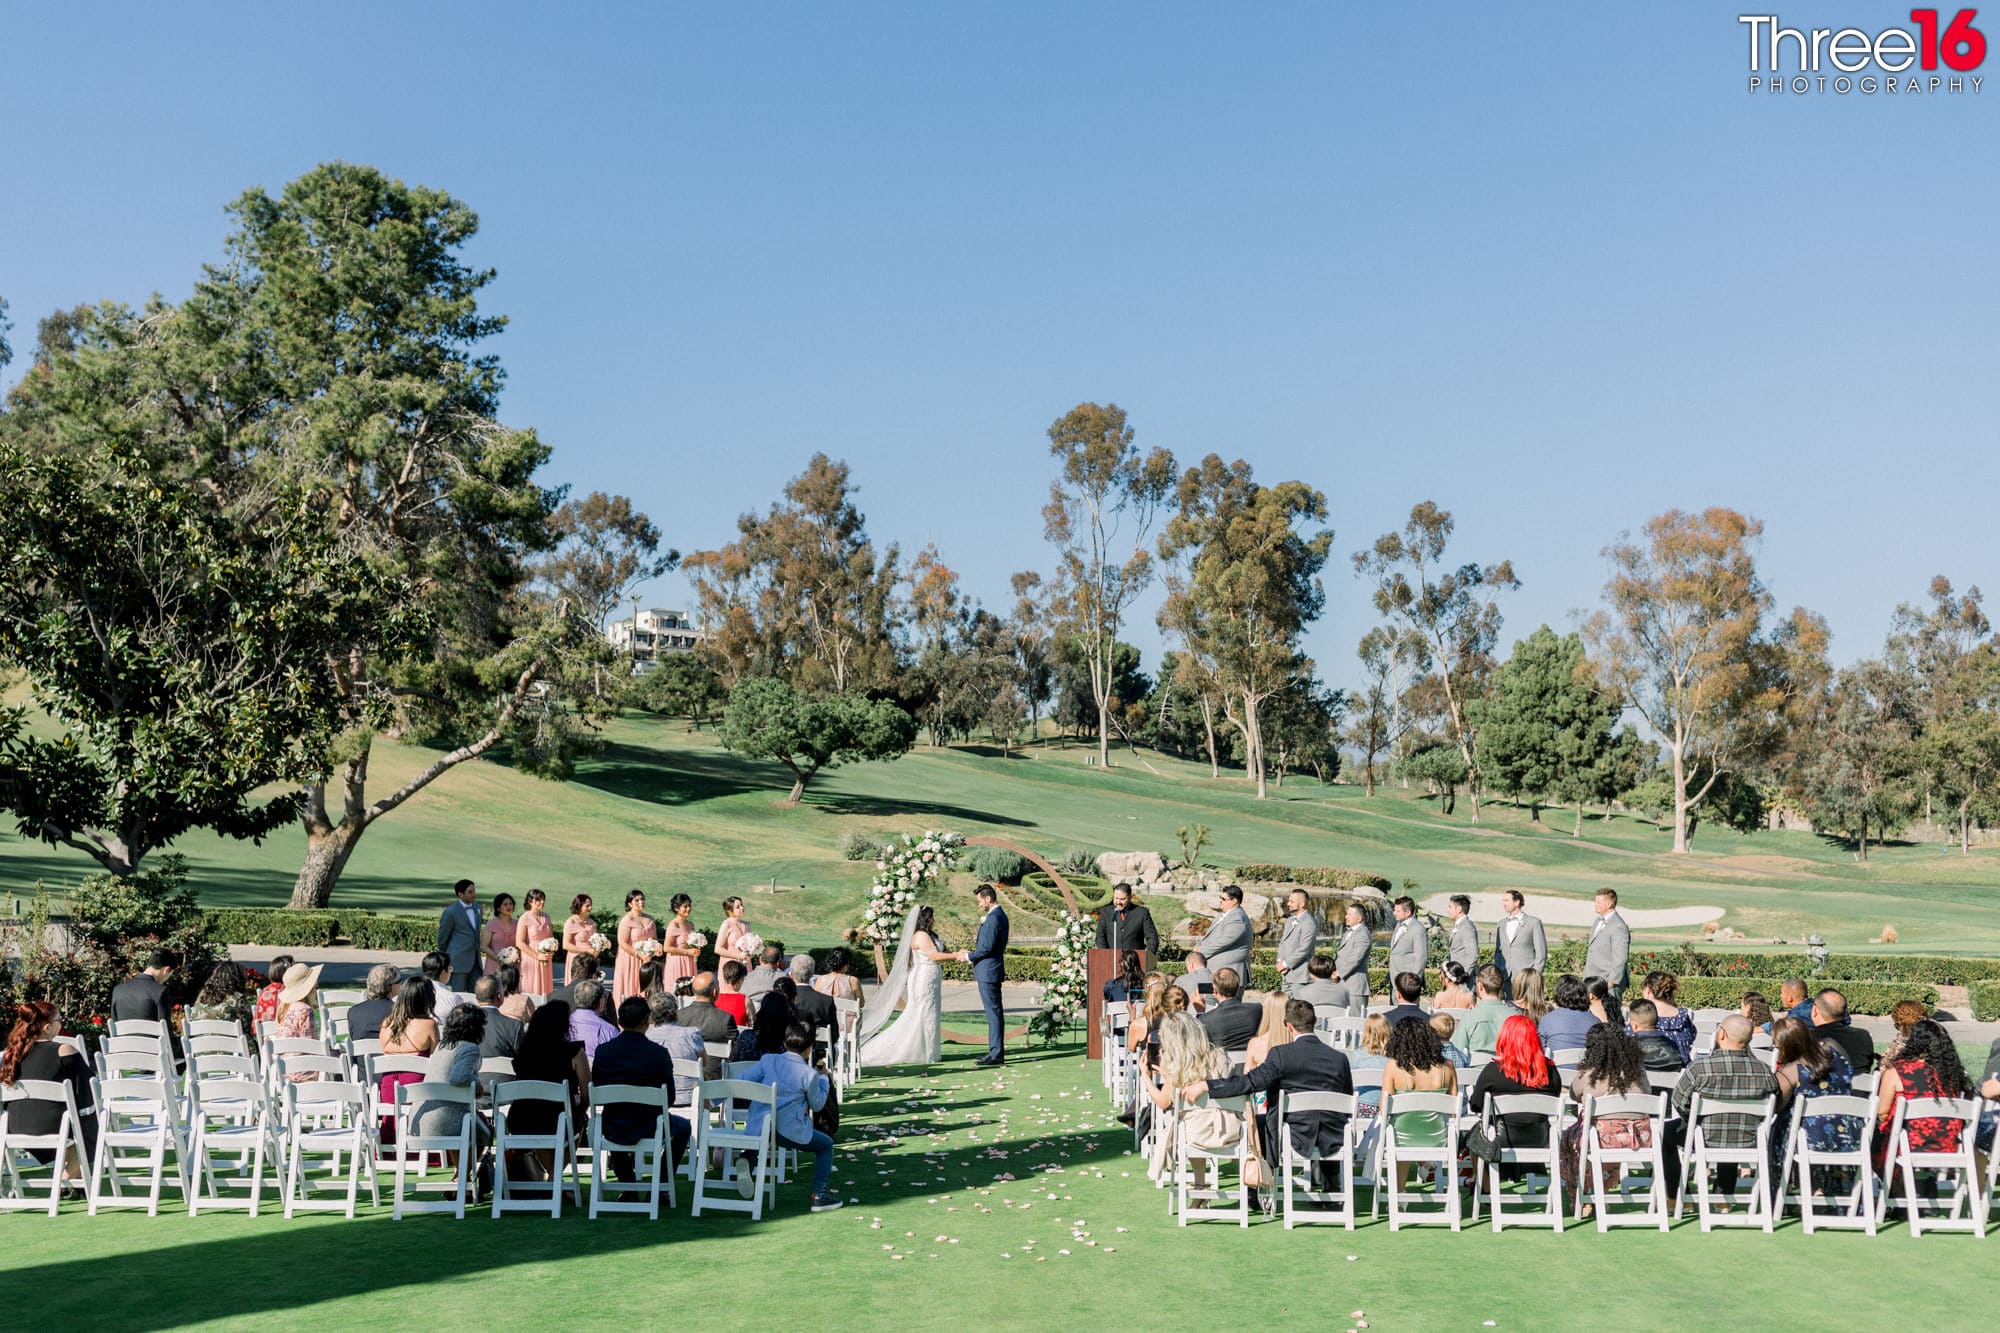 Bride and Groom face each other and hold hands while taking their vows on the green grass of the Marbella Country Club wedding venue in San Juan Capistrano.